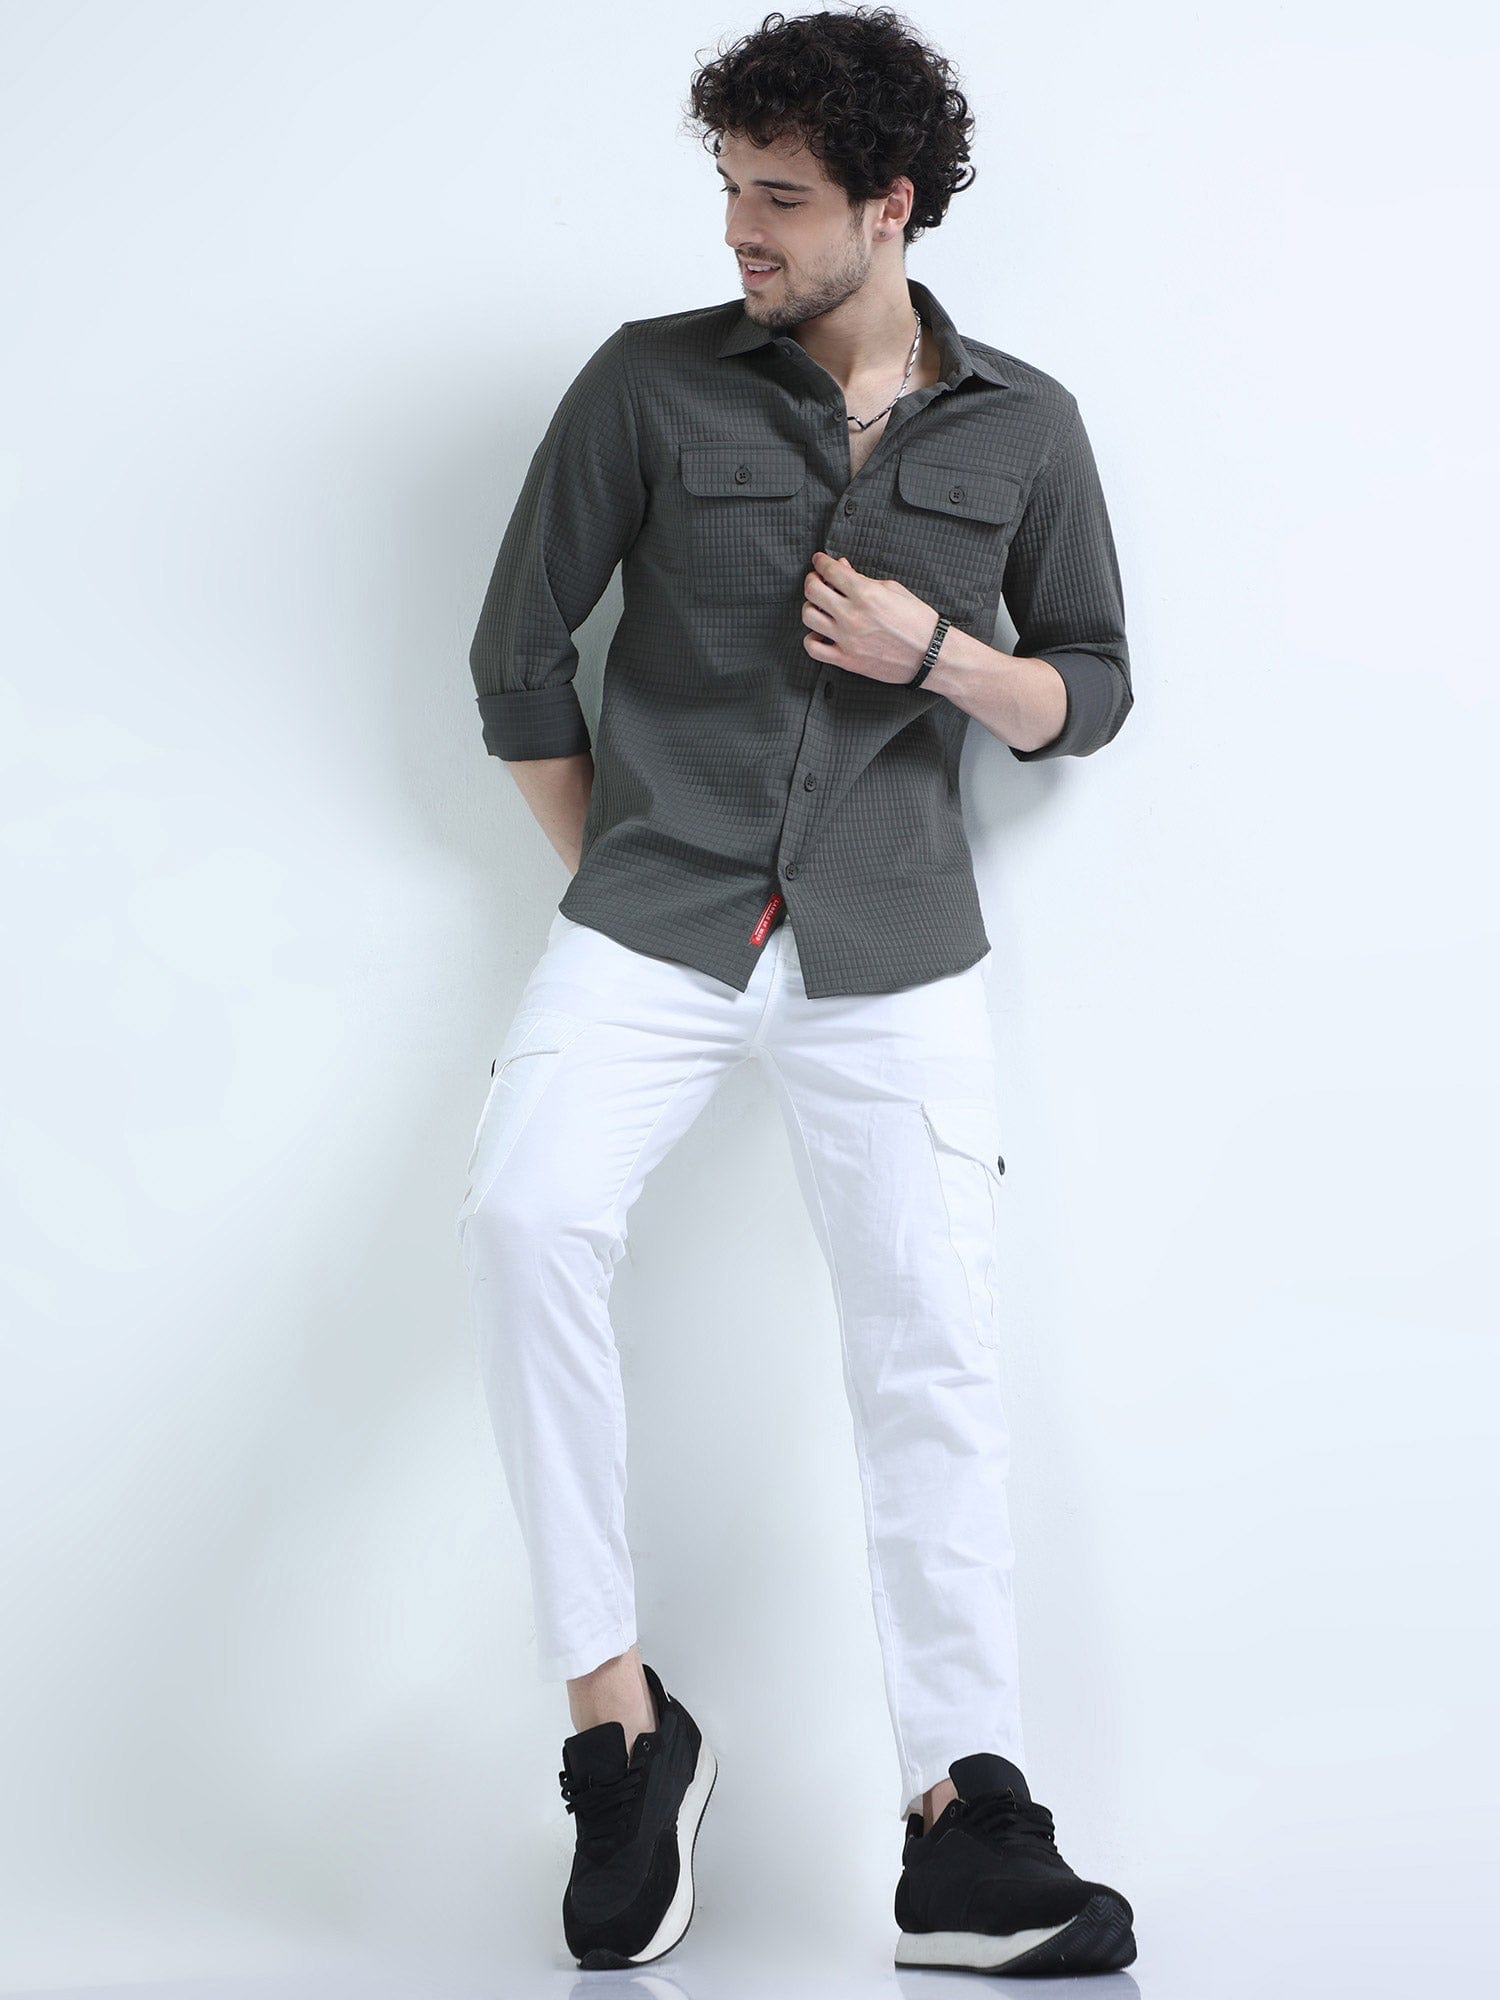 Pebble Grey Textured Solid Double Pocket Shirt